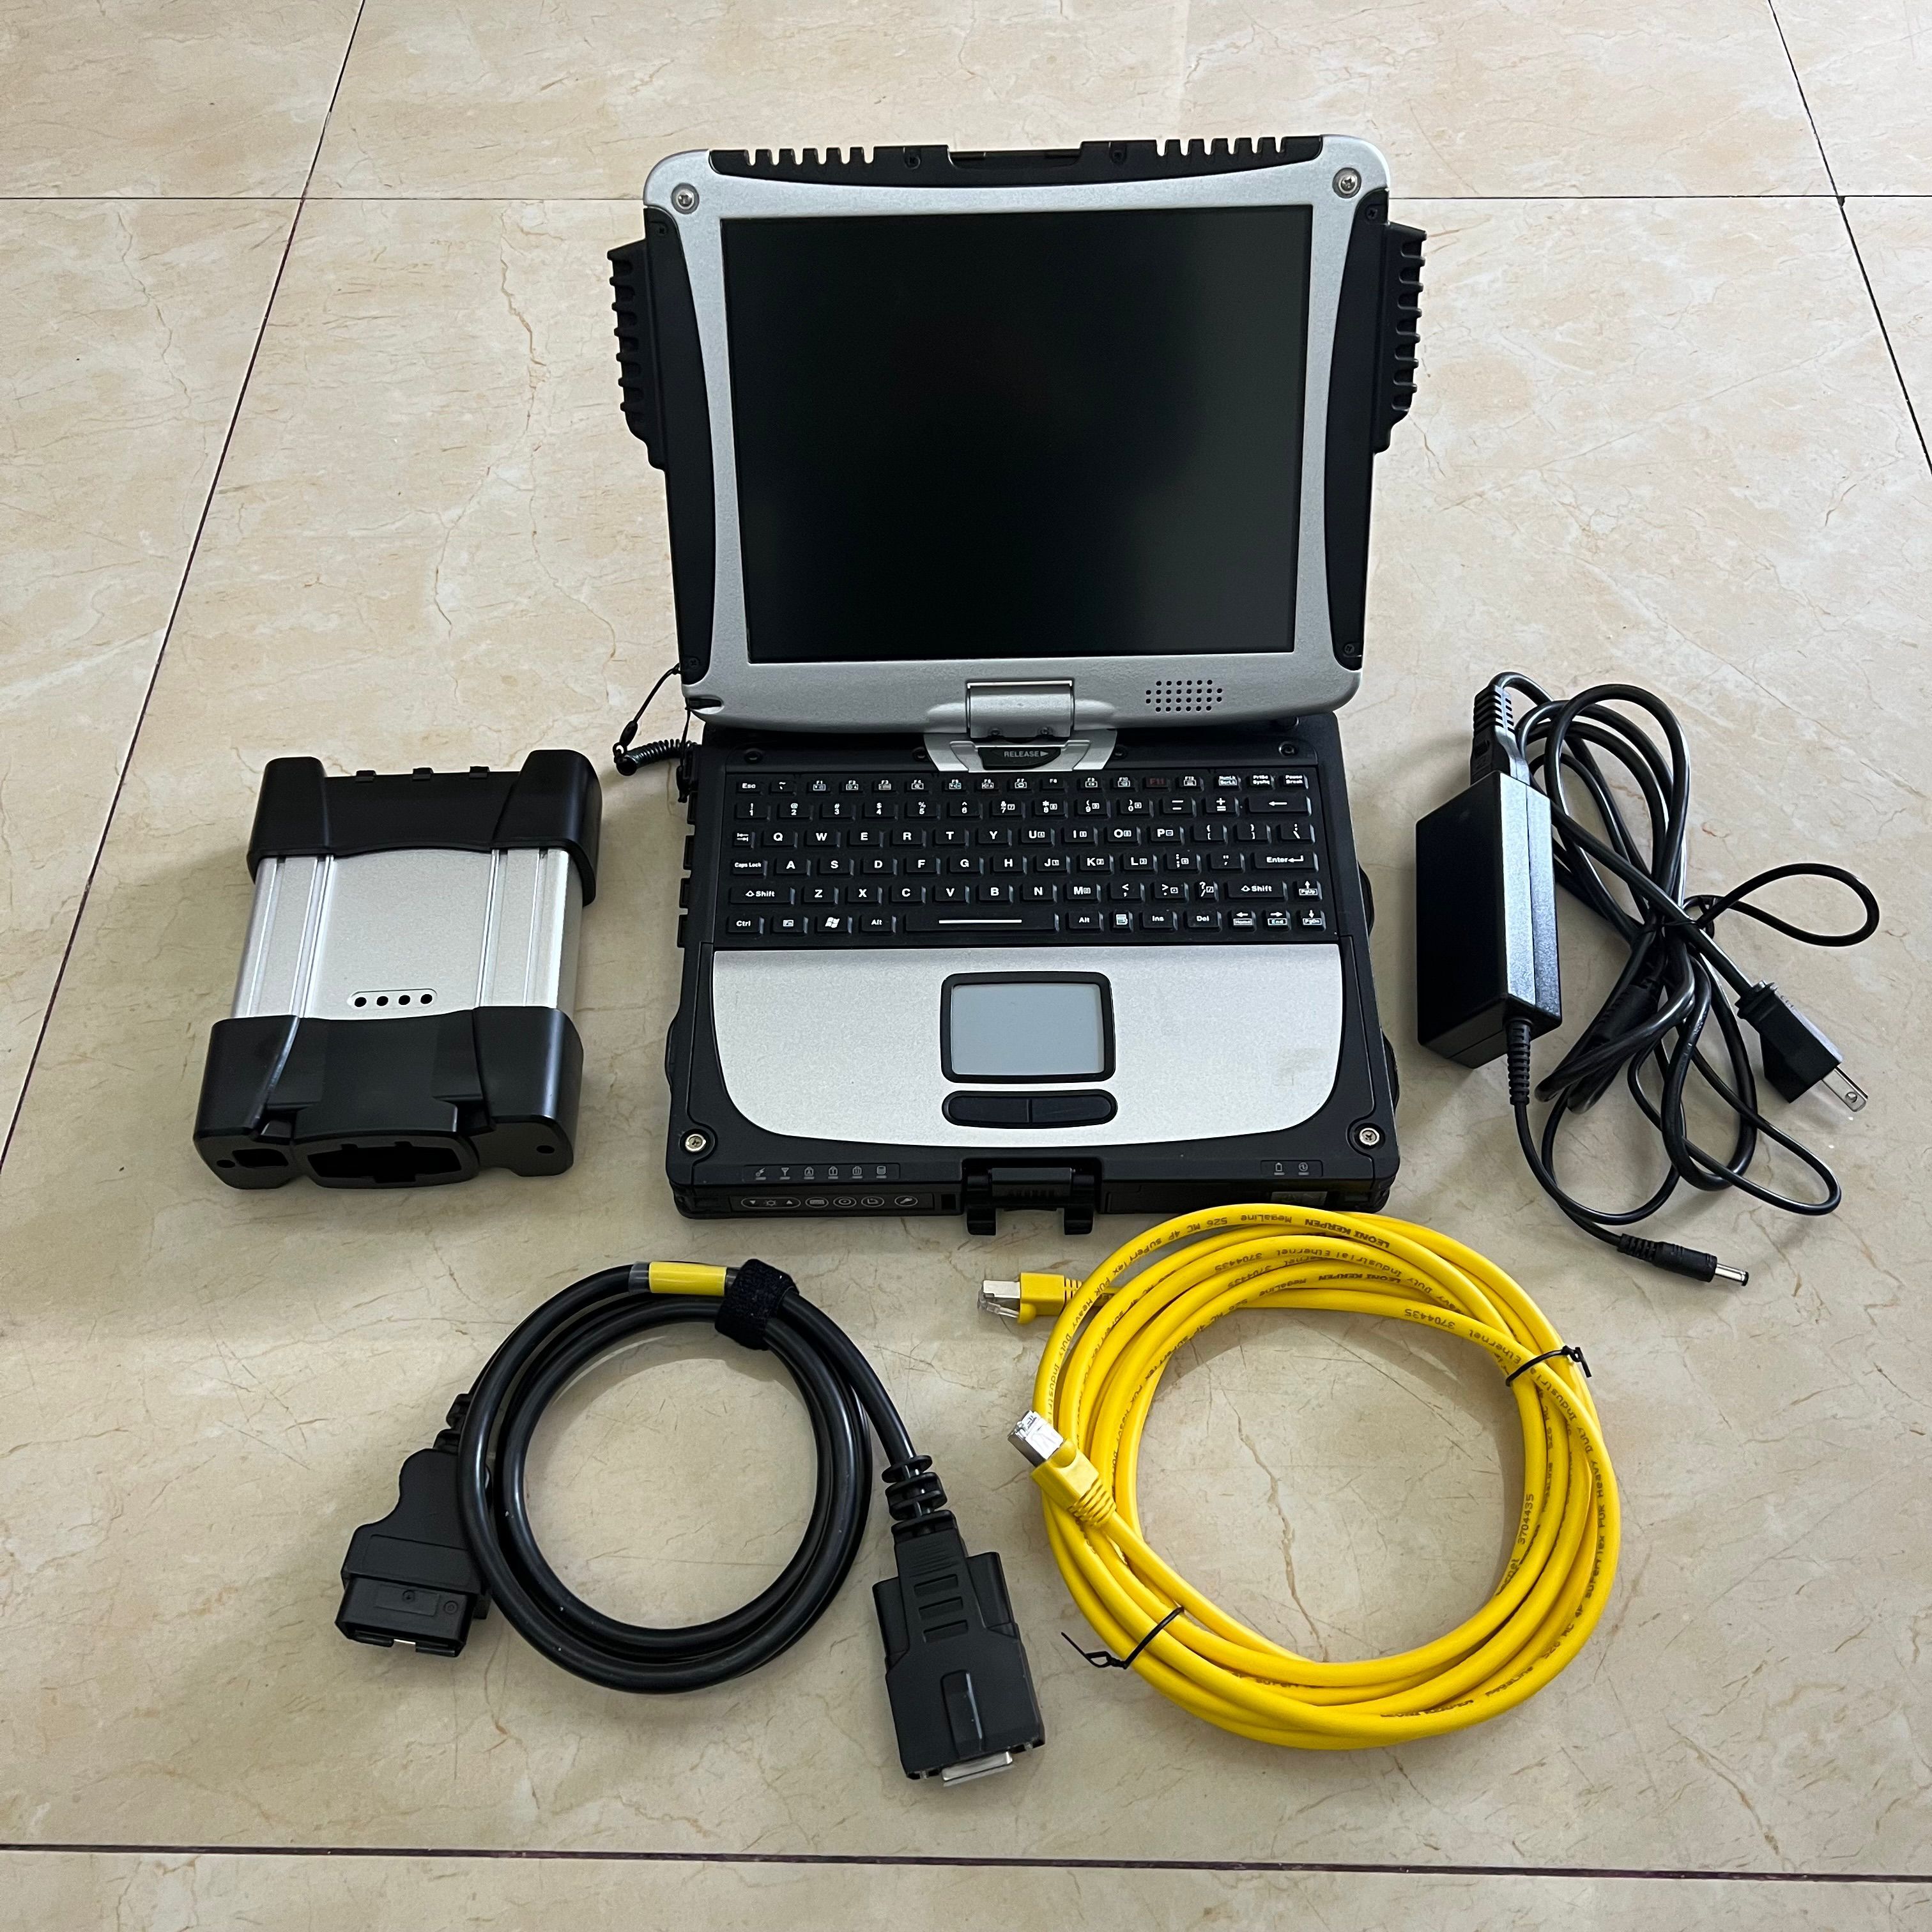 Professional ICOM NEXT For BMW New SSD V2024.03 Diagnostic & Programming Tool Support Multi-Language in CF-19 Laptop